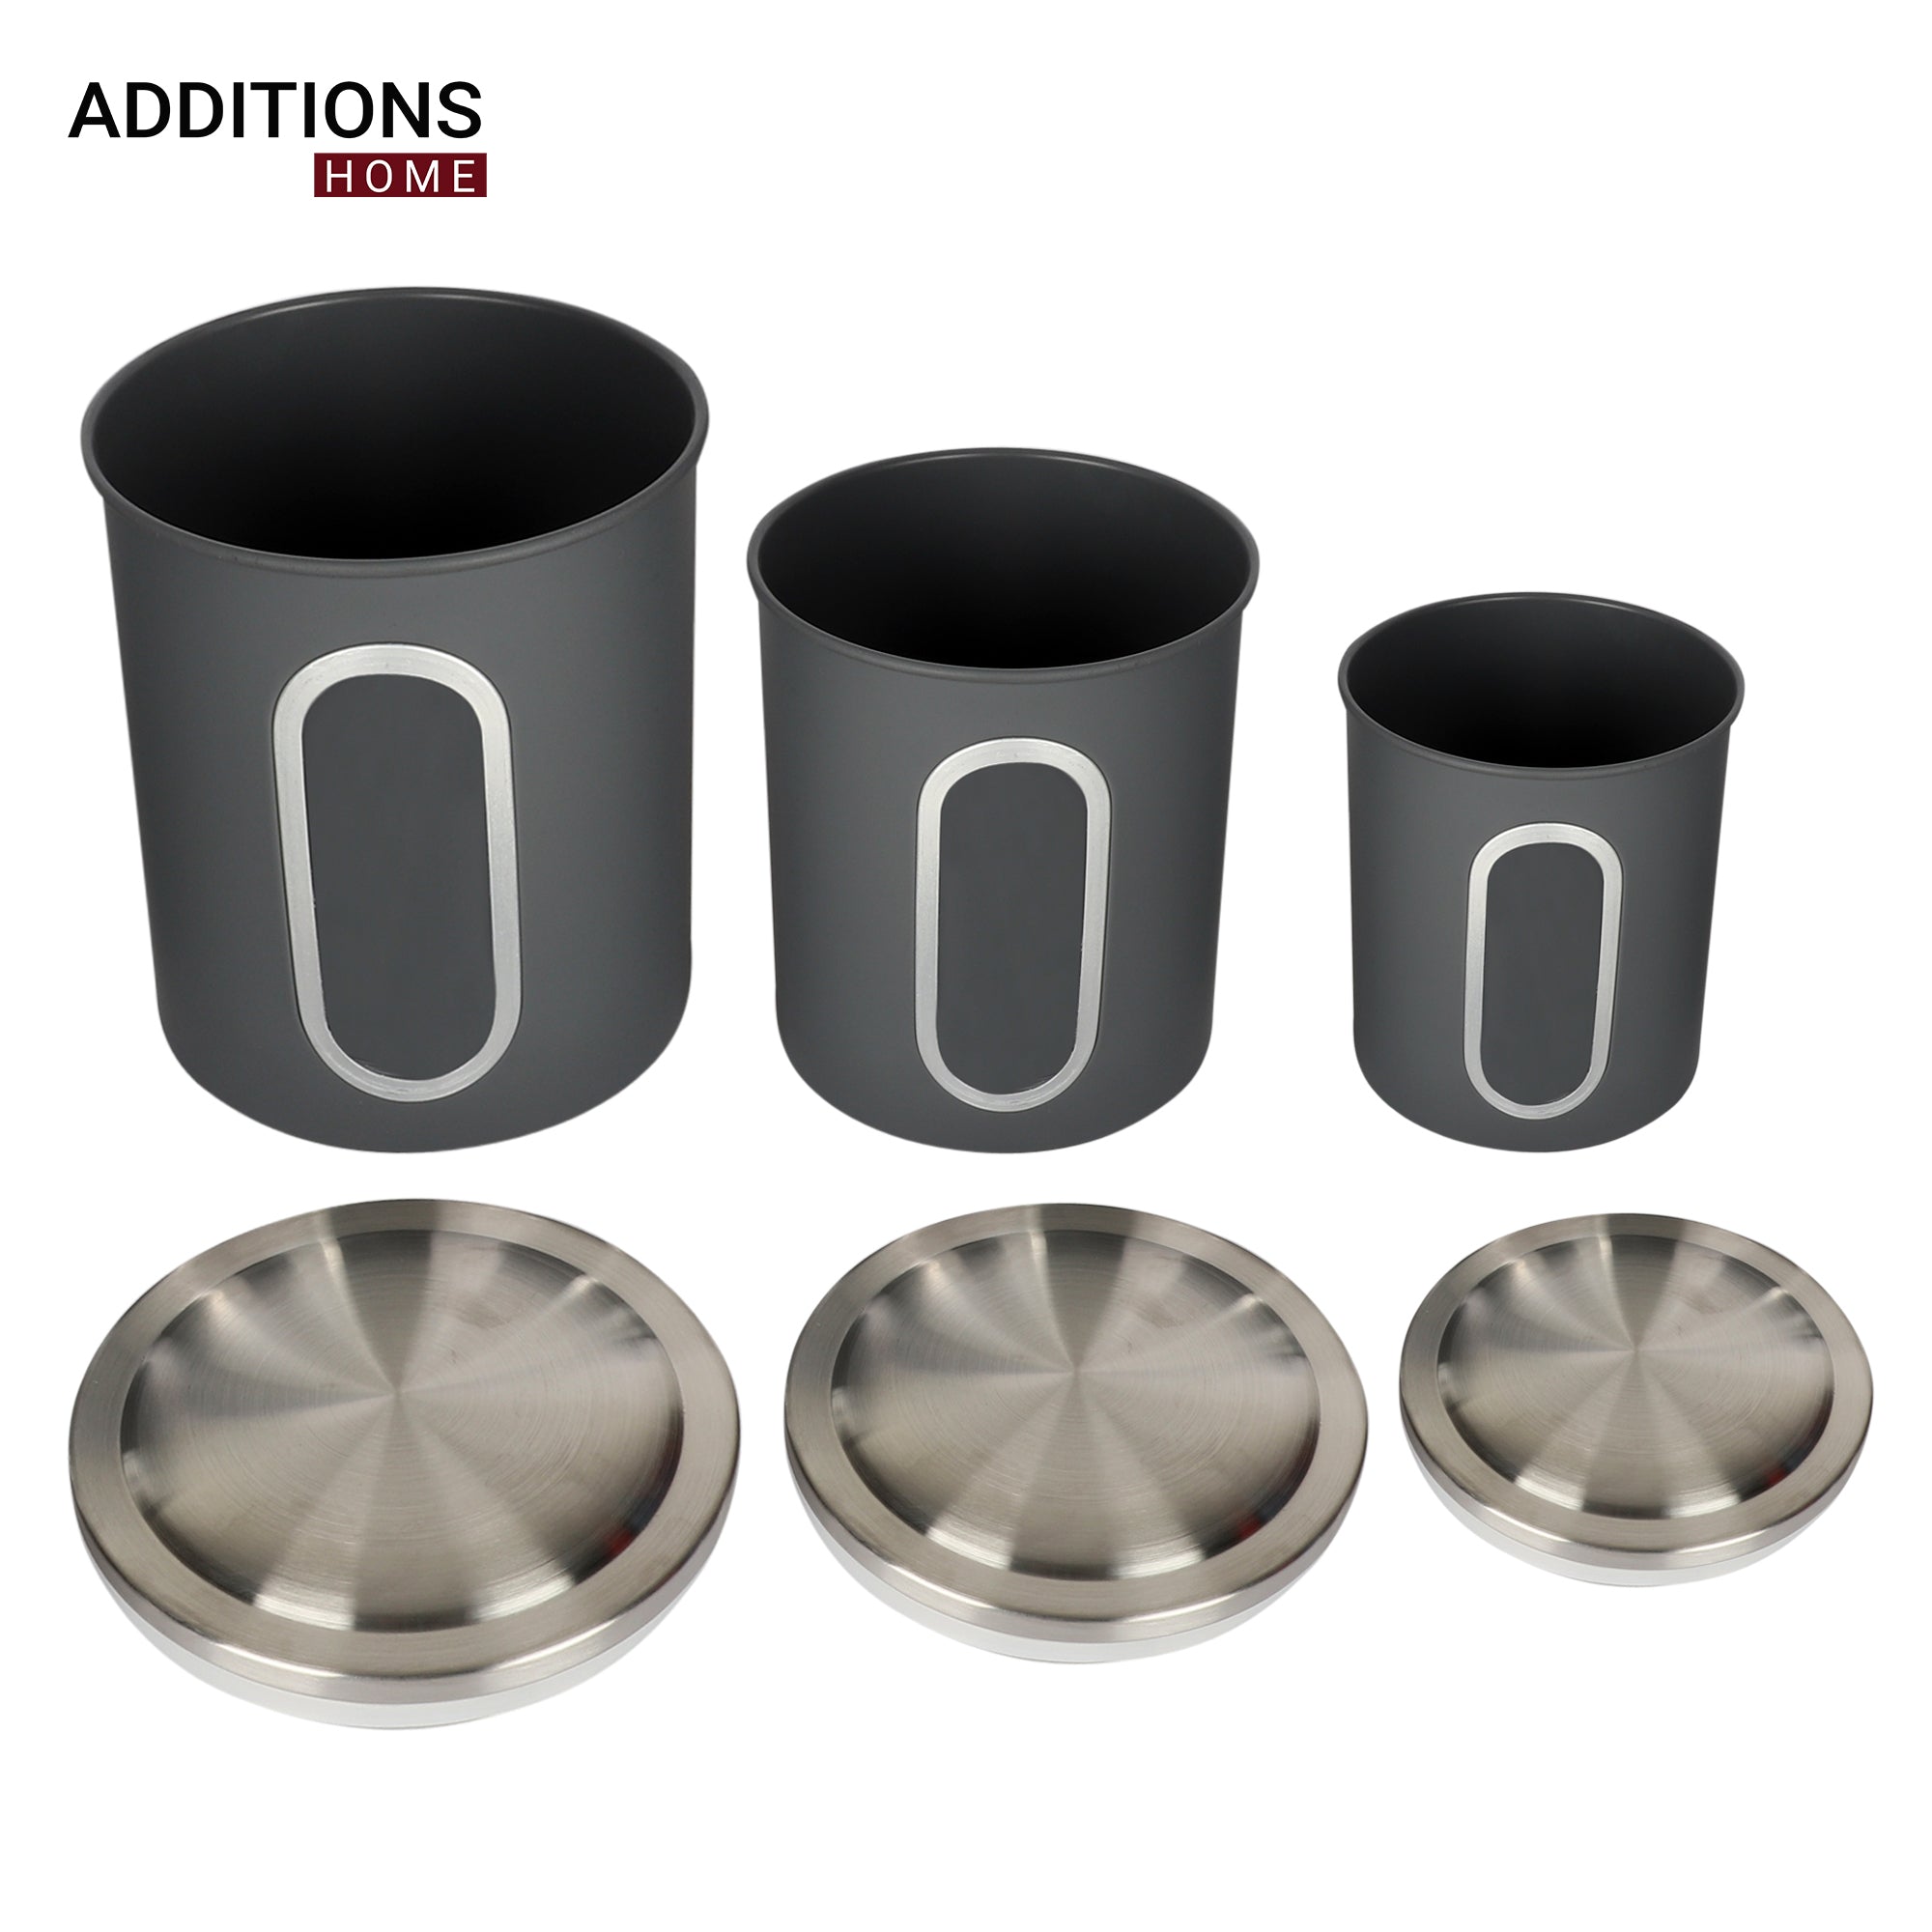 Additions Home 3 Pc Kitchen Canister set